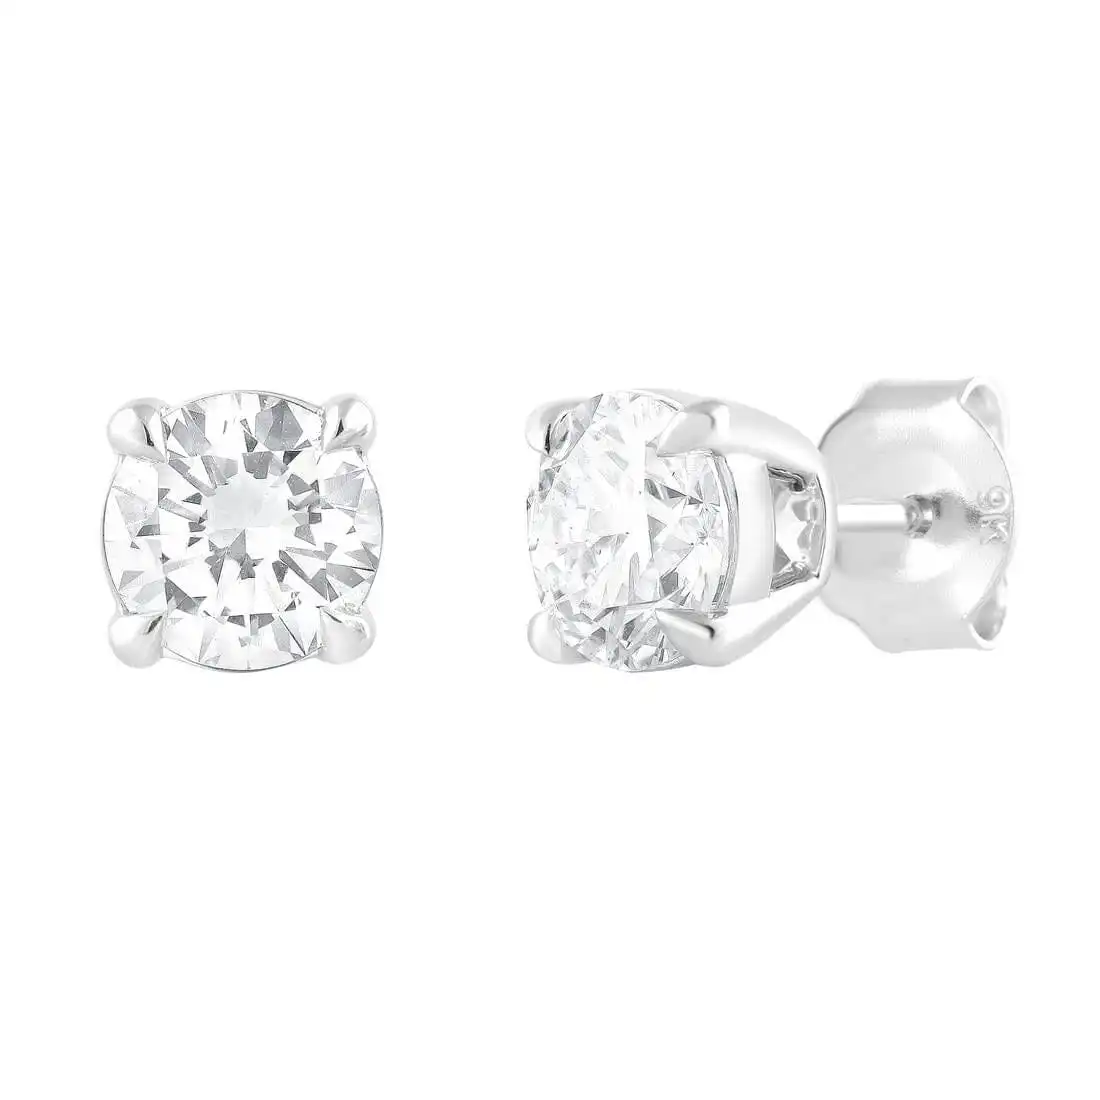 Meera 2.00ct Laboratory Grown Solitaire Diamond Earrings in 9ct White Gold